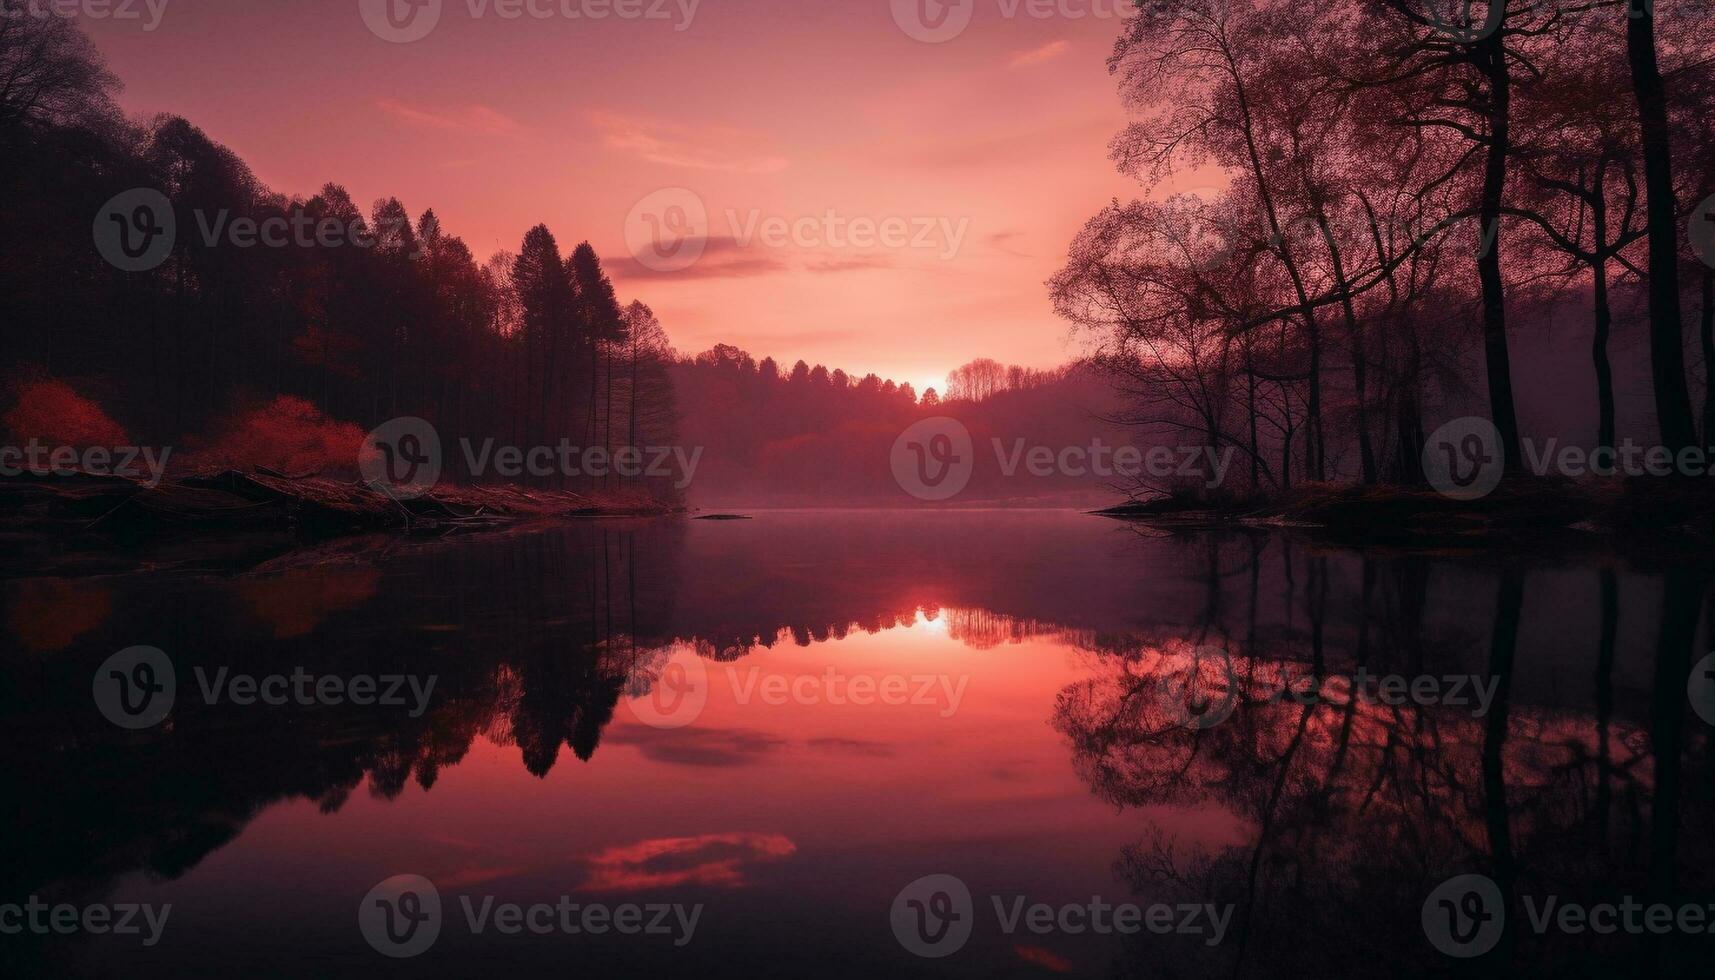 A tranquil scene at dusk, reflecting the beauty of nature generated by AI photo